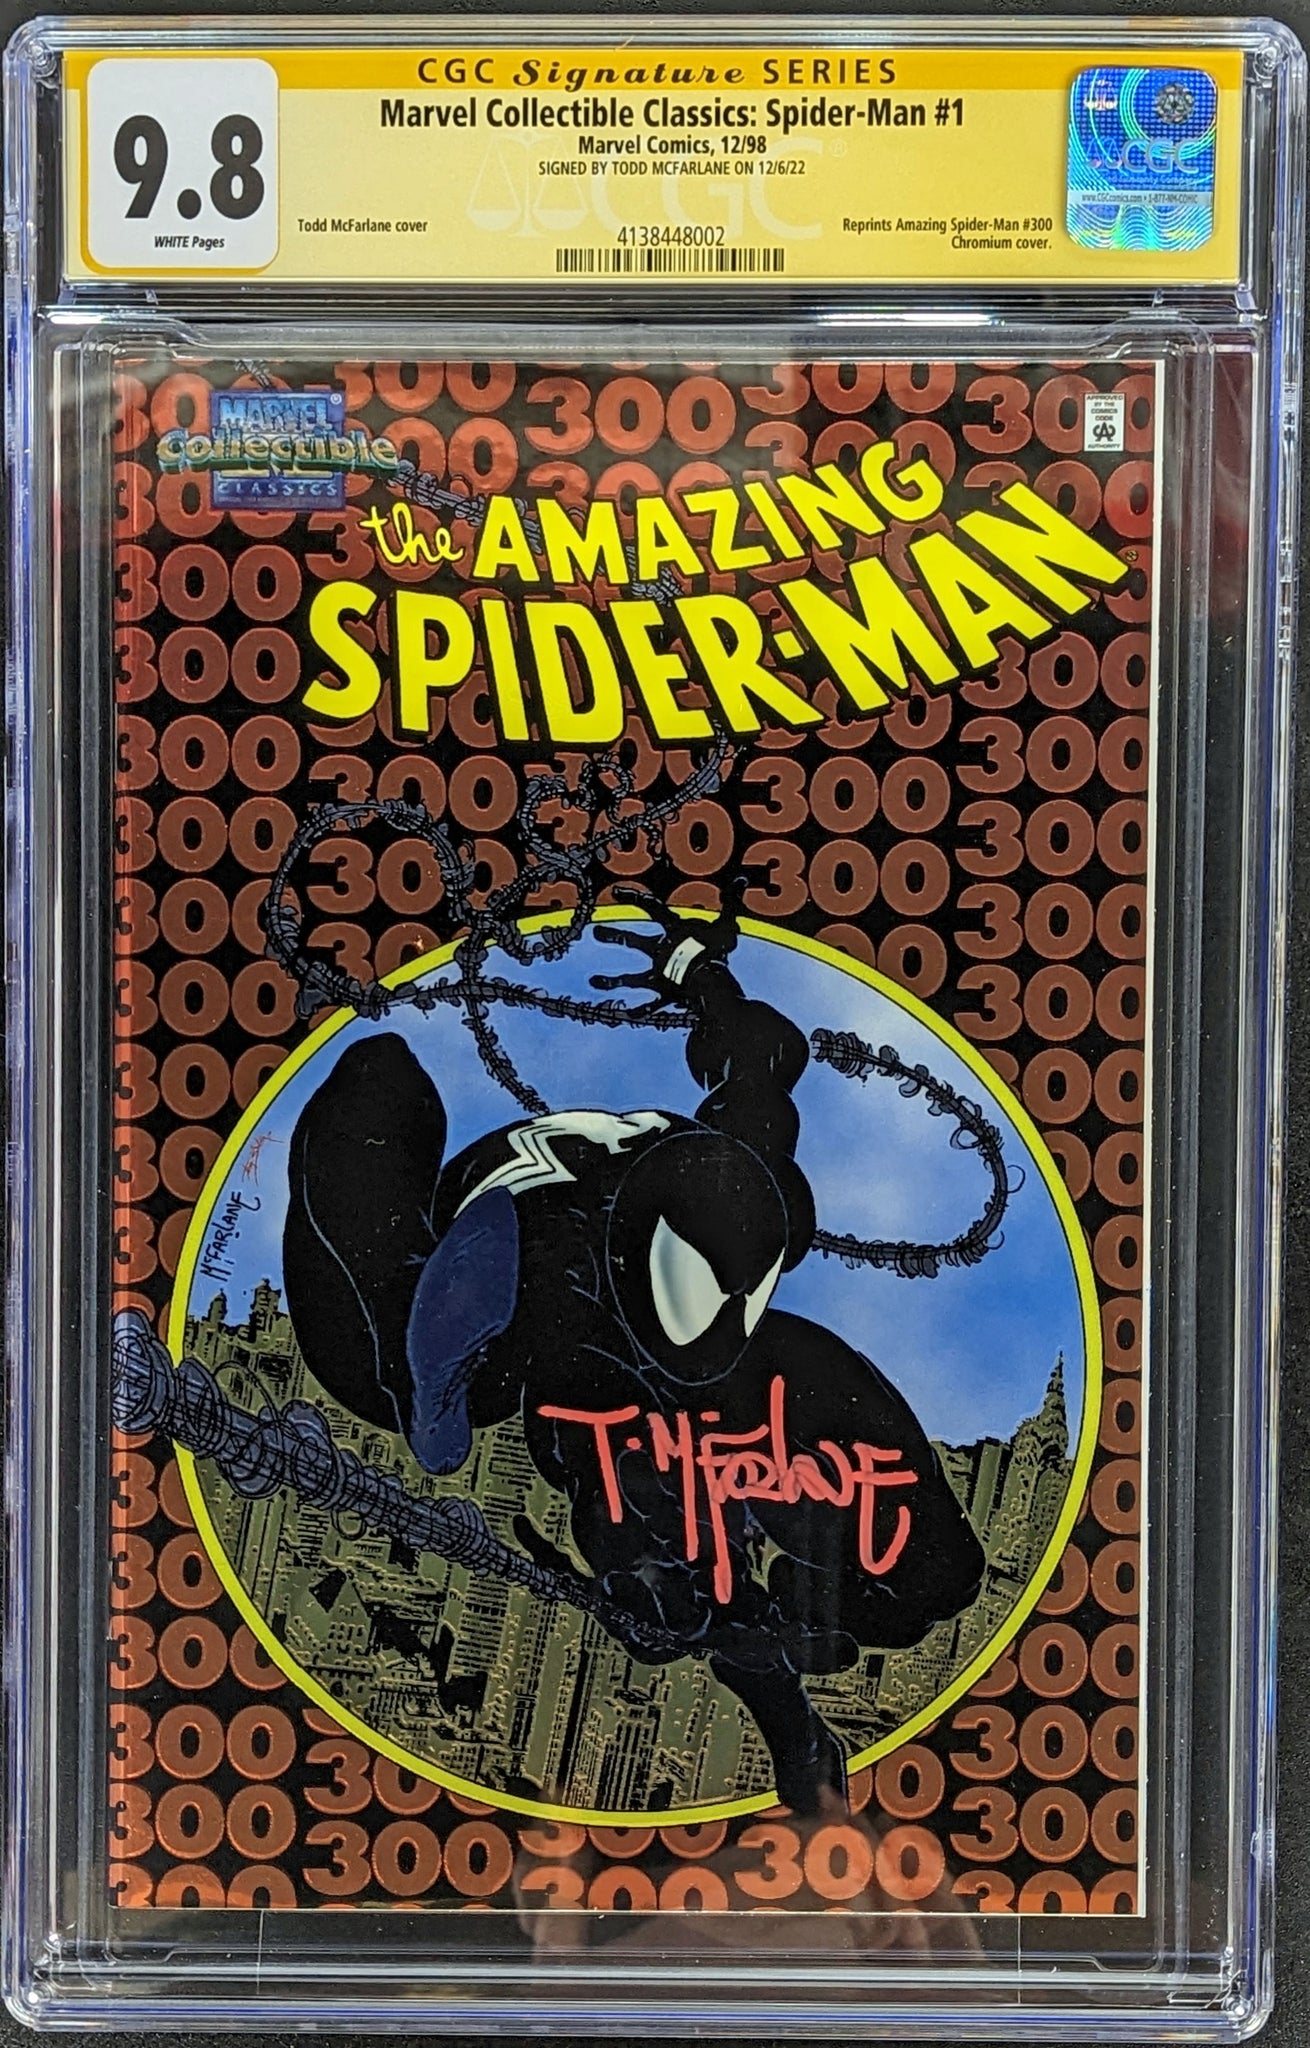 Spider-Man 1 Todd Mcfarlane series. I can't find any editions that have a  signature below the price. Does anyone know which editions these are? :  r/comicbookcollecting